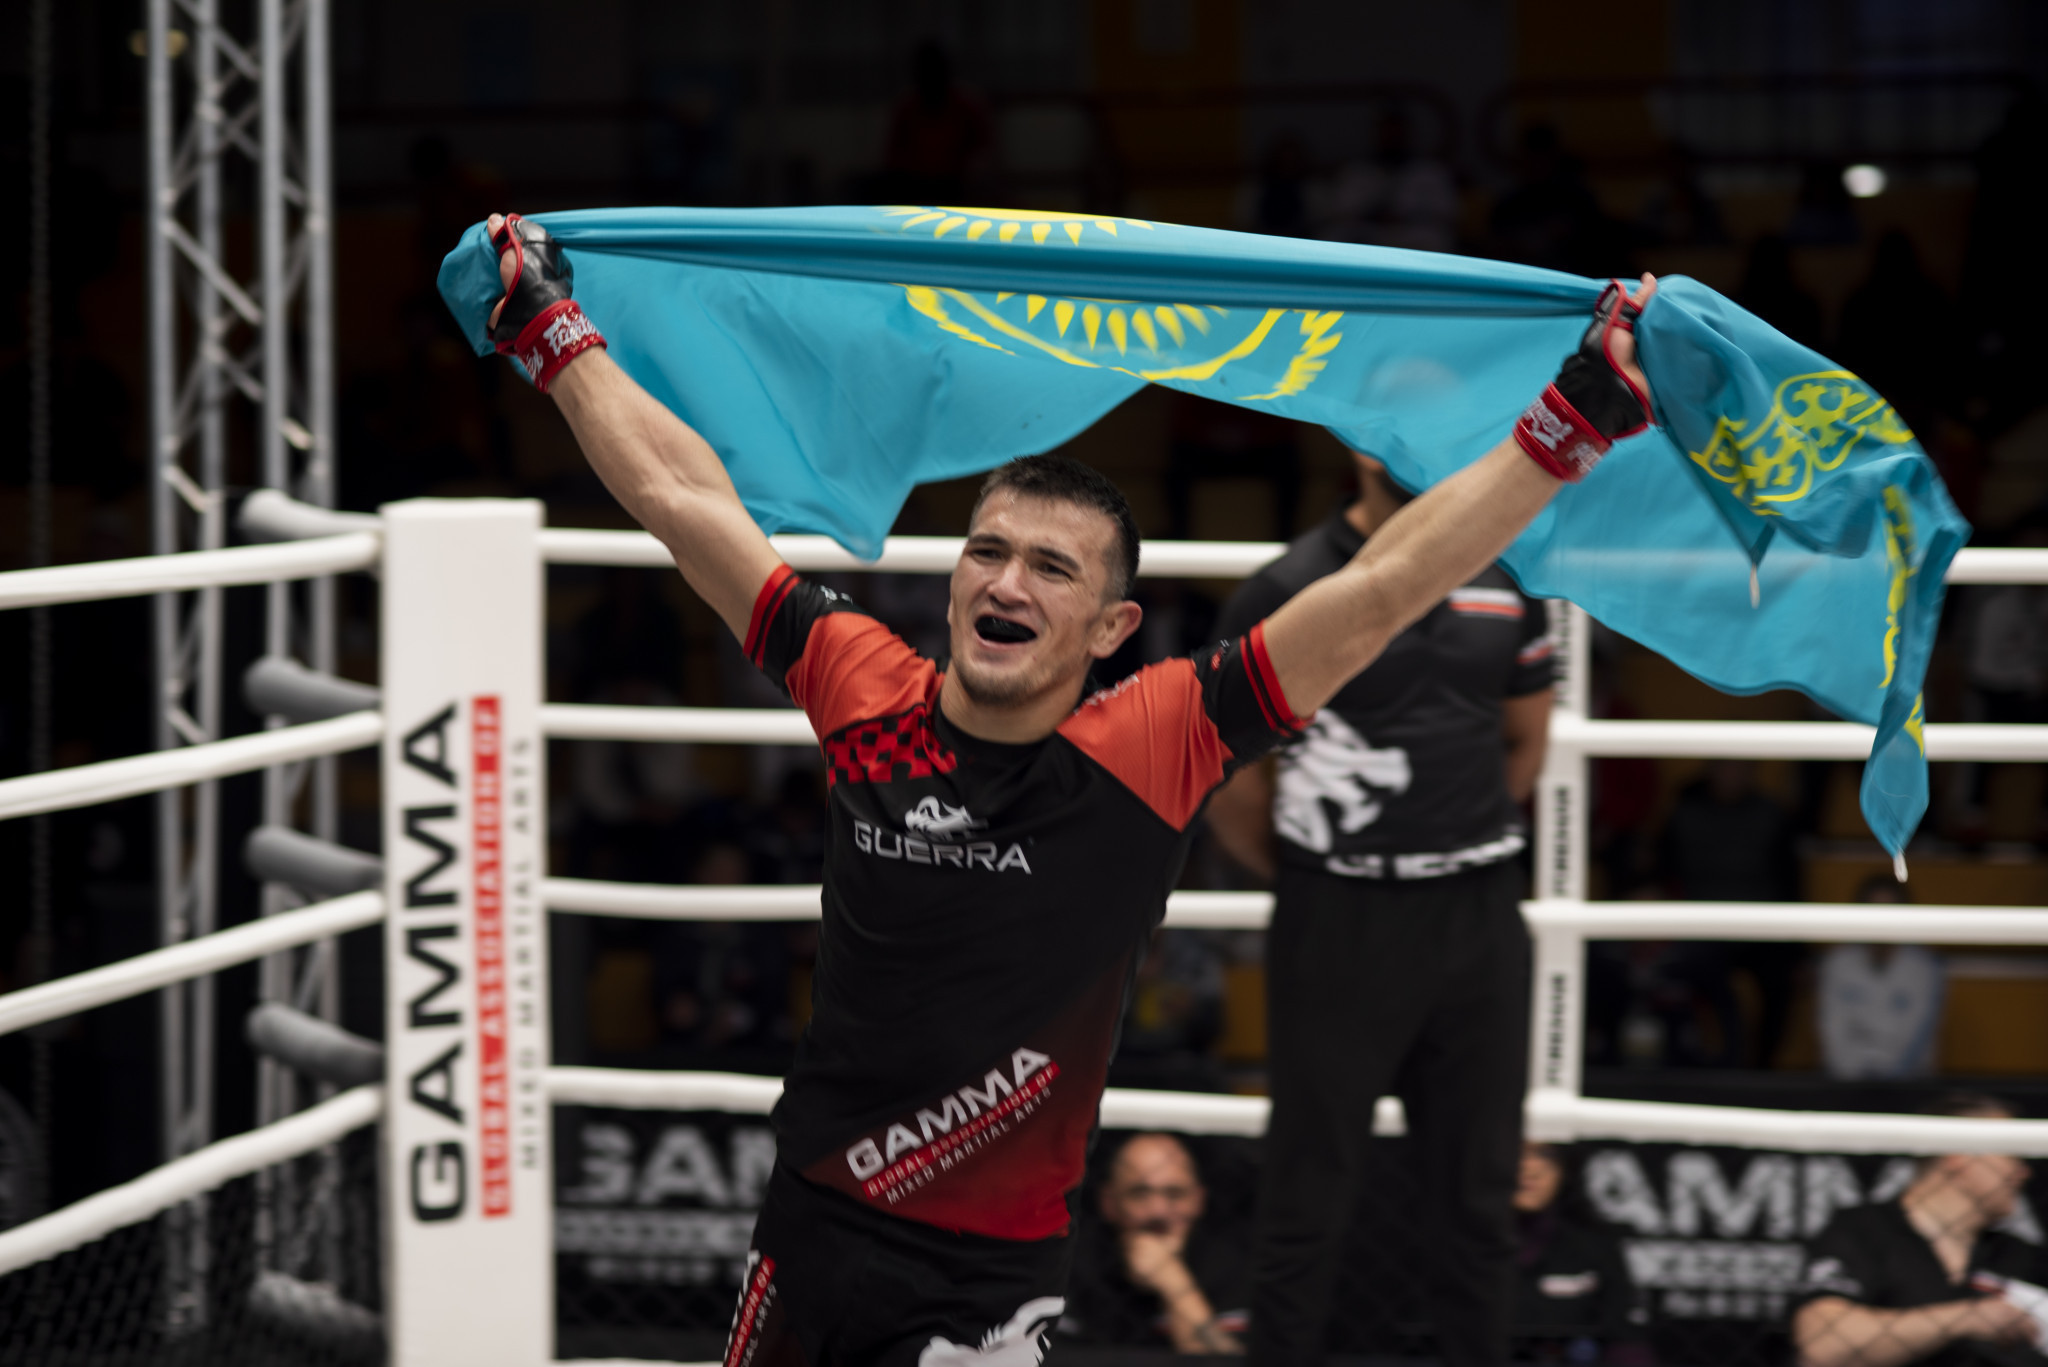 More than 400 athletes from 50 countries participated in the GAMMA World MMA Championships in Amsterdam in March ©GAMMA